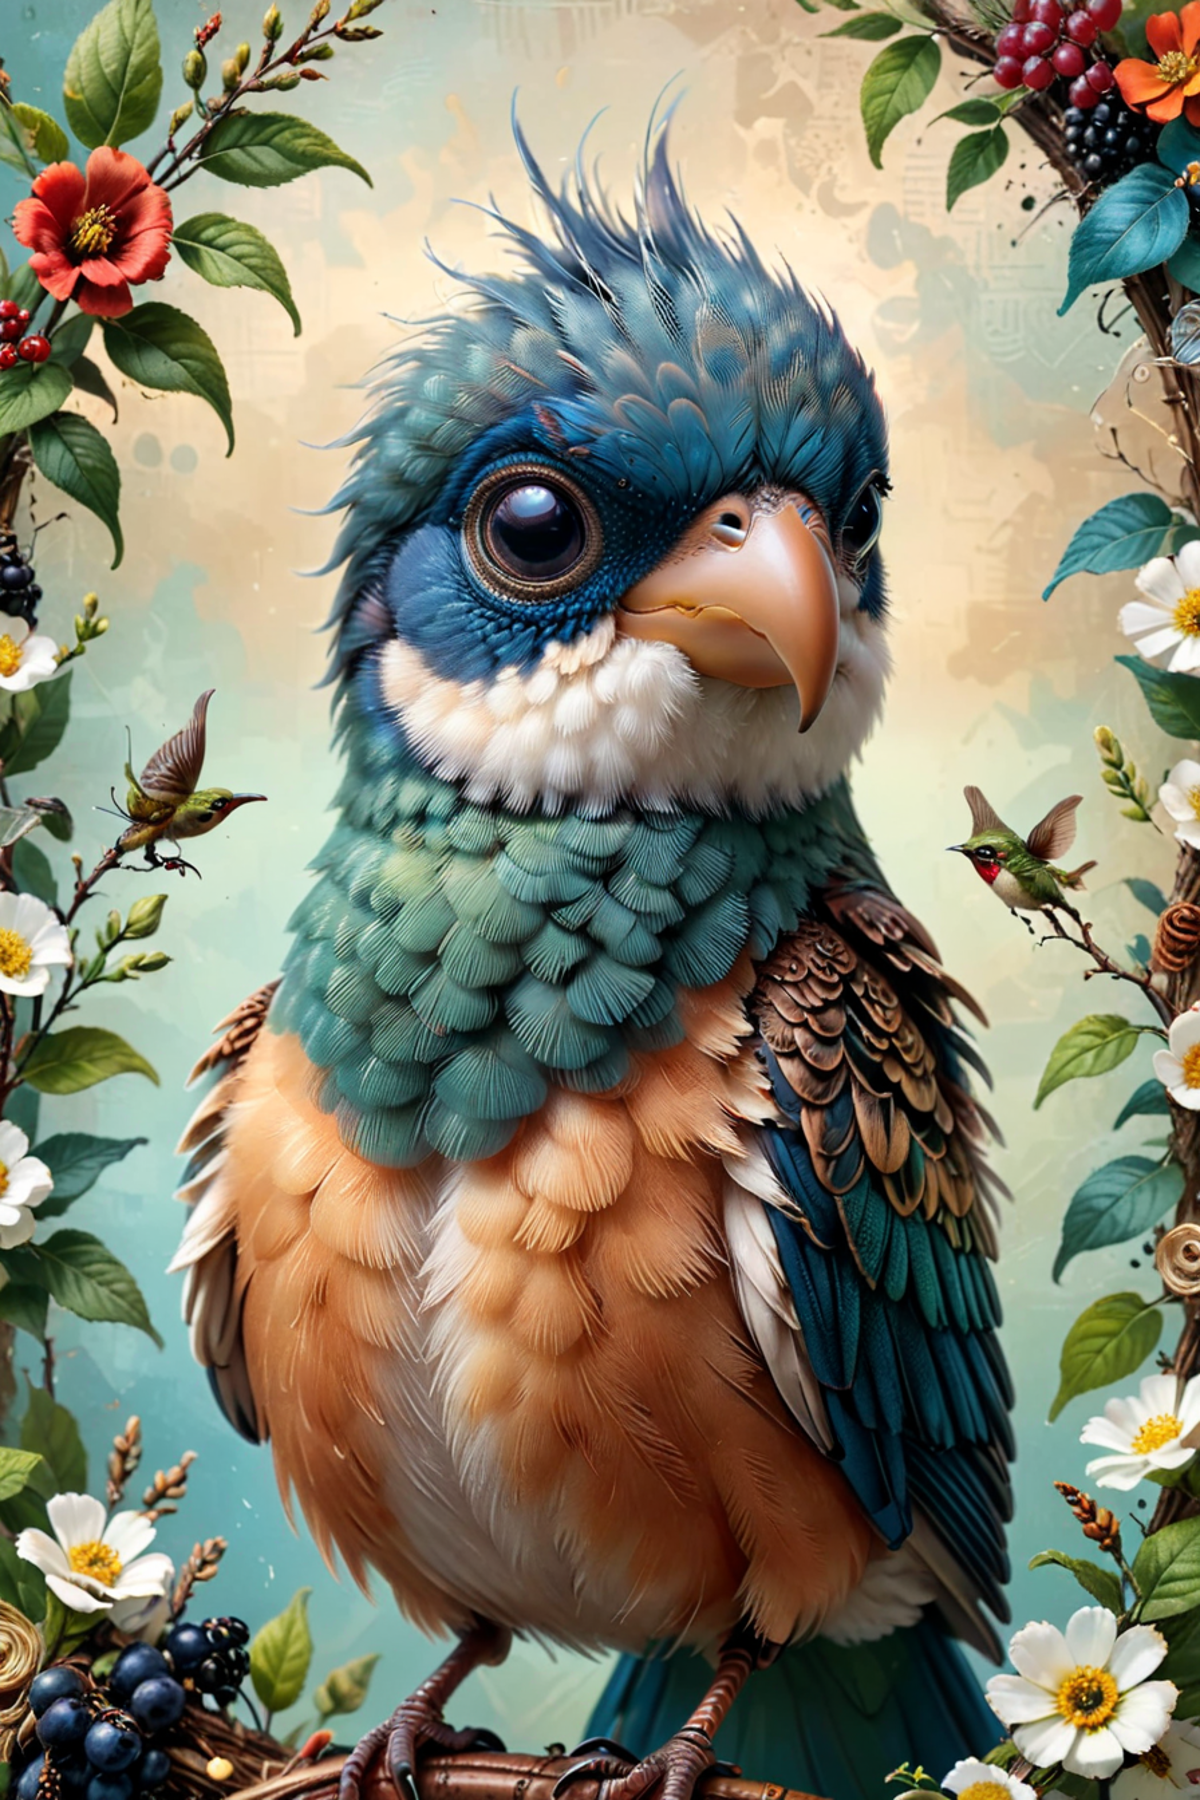 A blue bird with a white face, surrounded by flowers and berries.